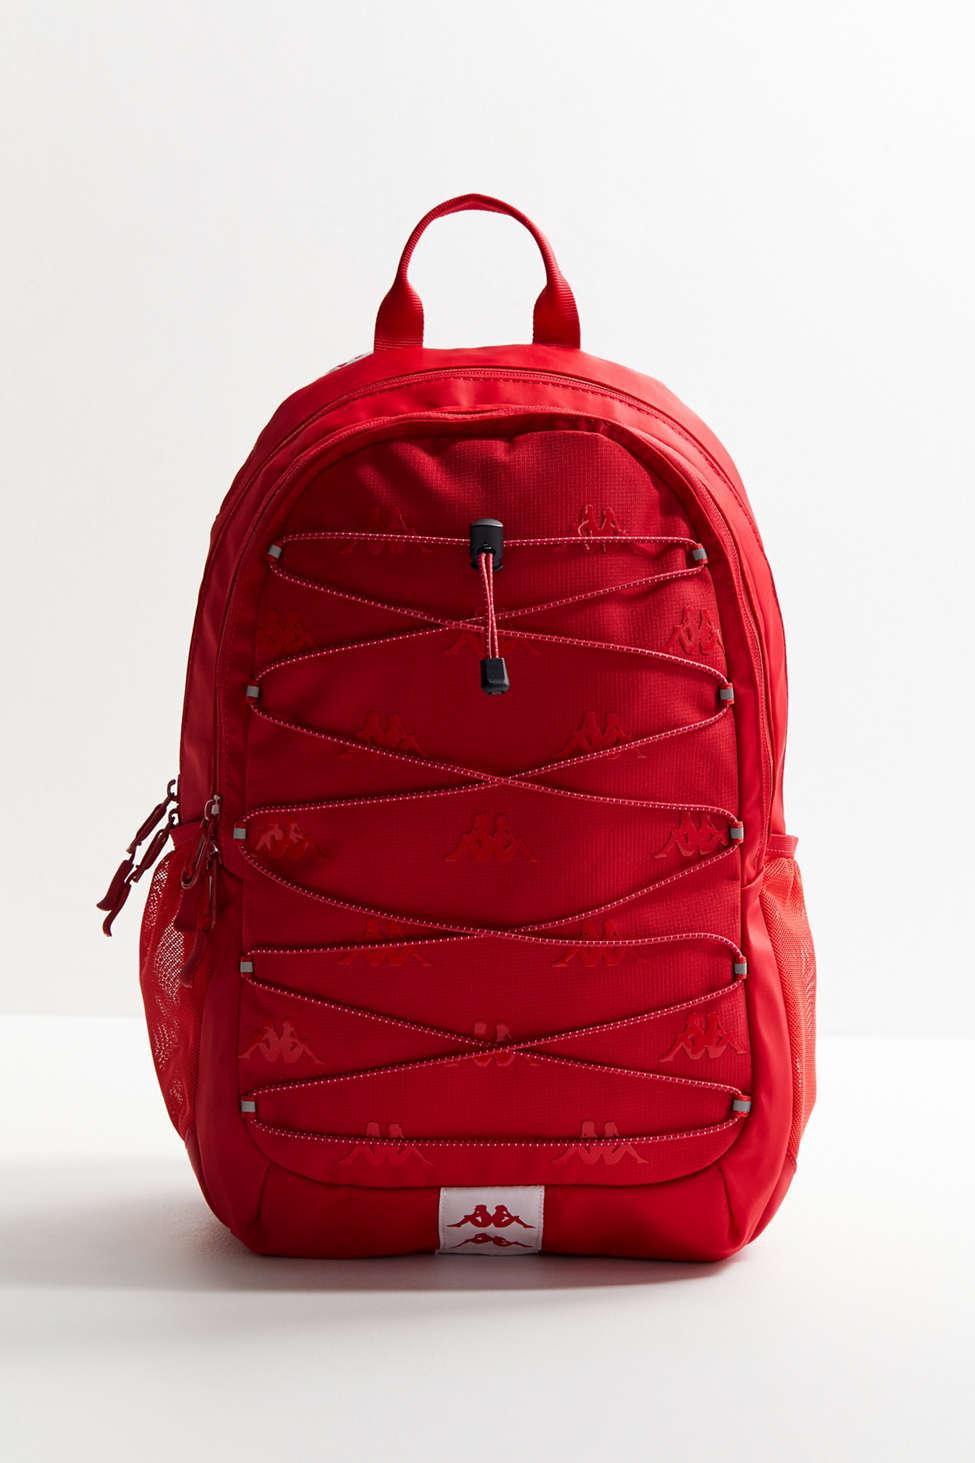 Kappa Synthetic The Prmium Backpack In Dark Red And White - Lyst